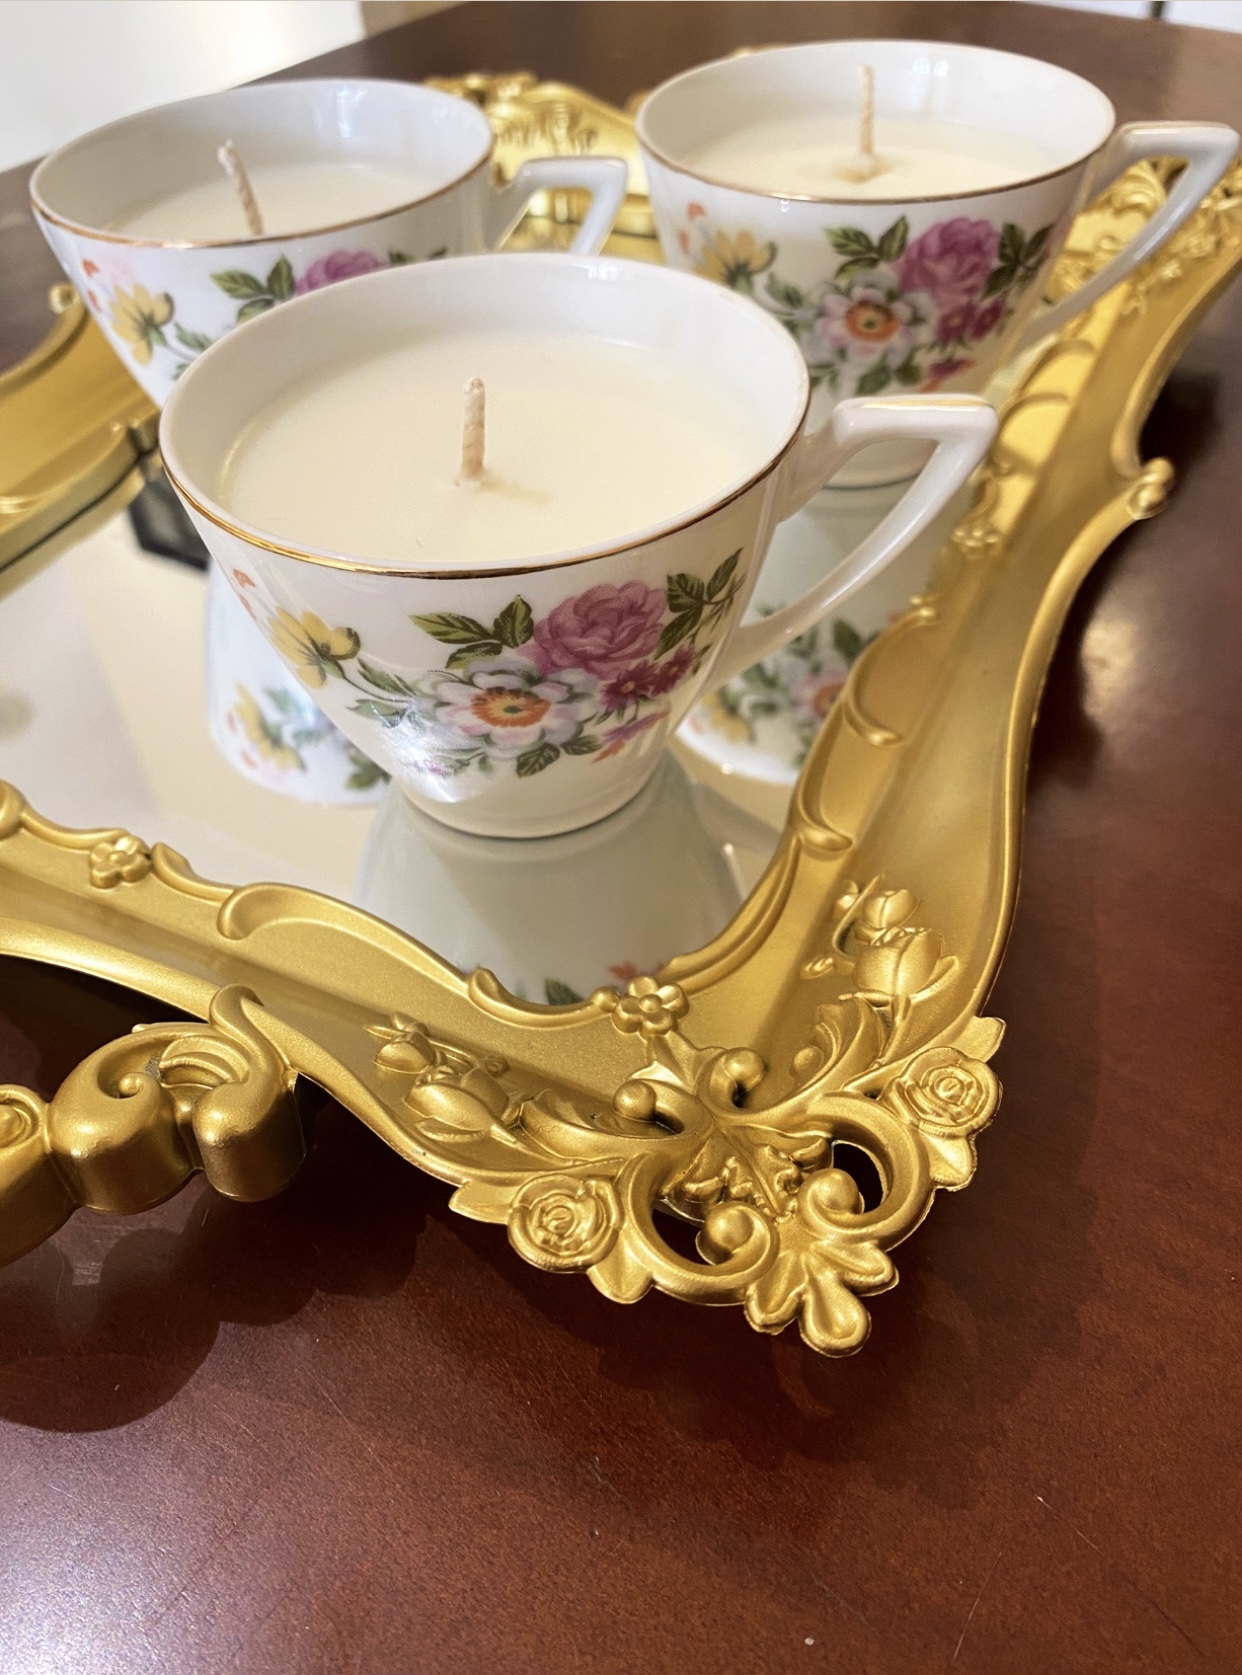 A Teacup Candles  experience project by Yaymaker